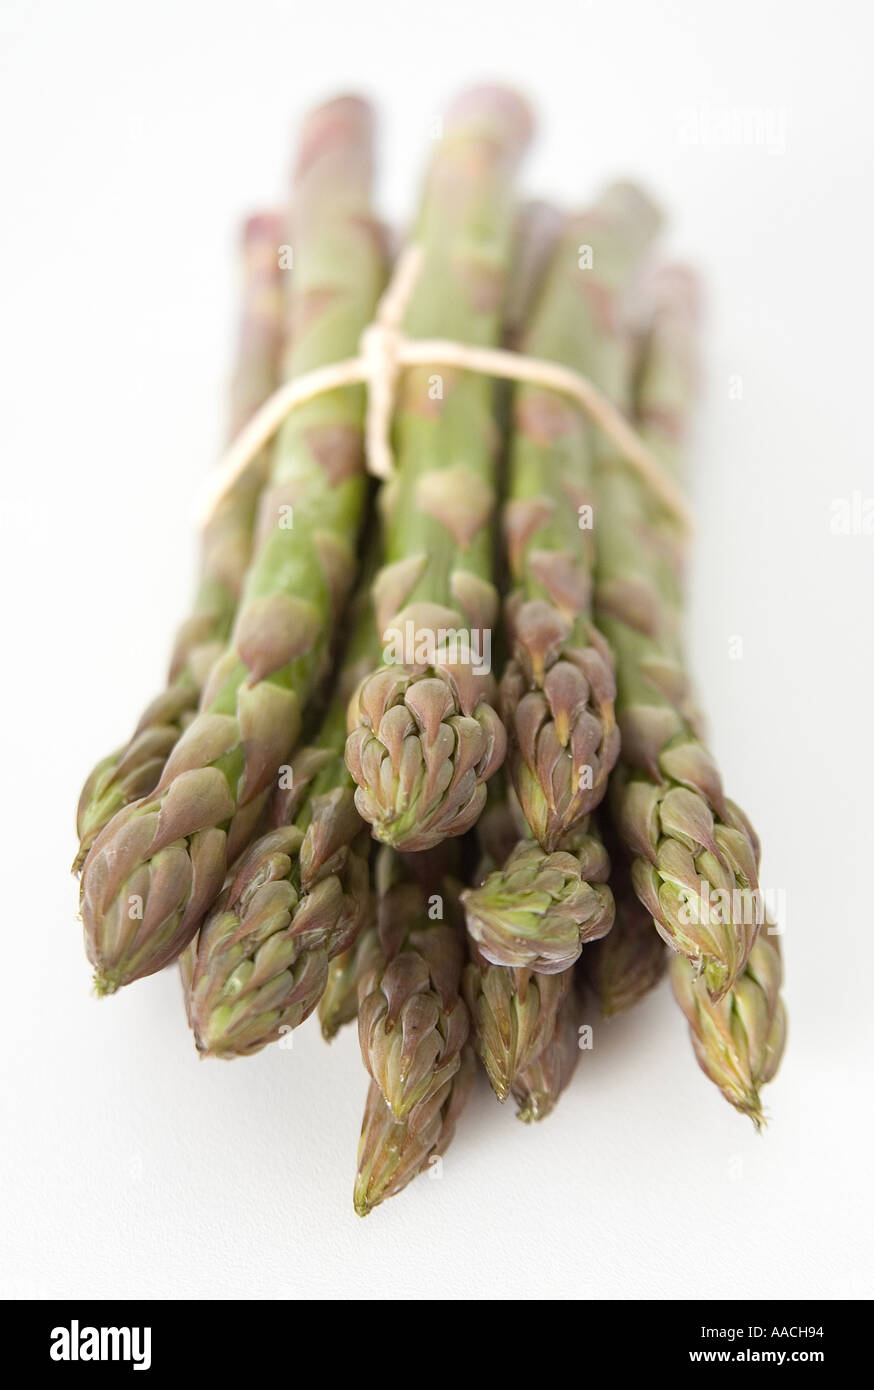 Fresh asparagus tied up with string. Shot from the tip-end with a narrow depth of field on a white background. Stock Photo